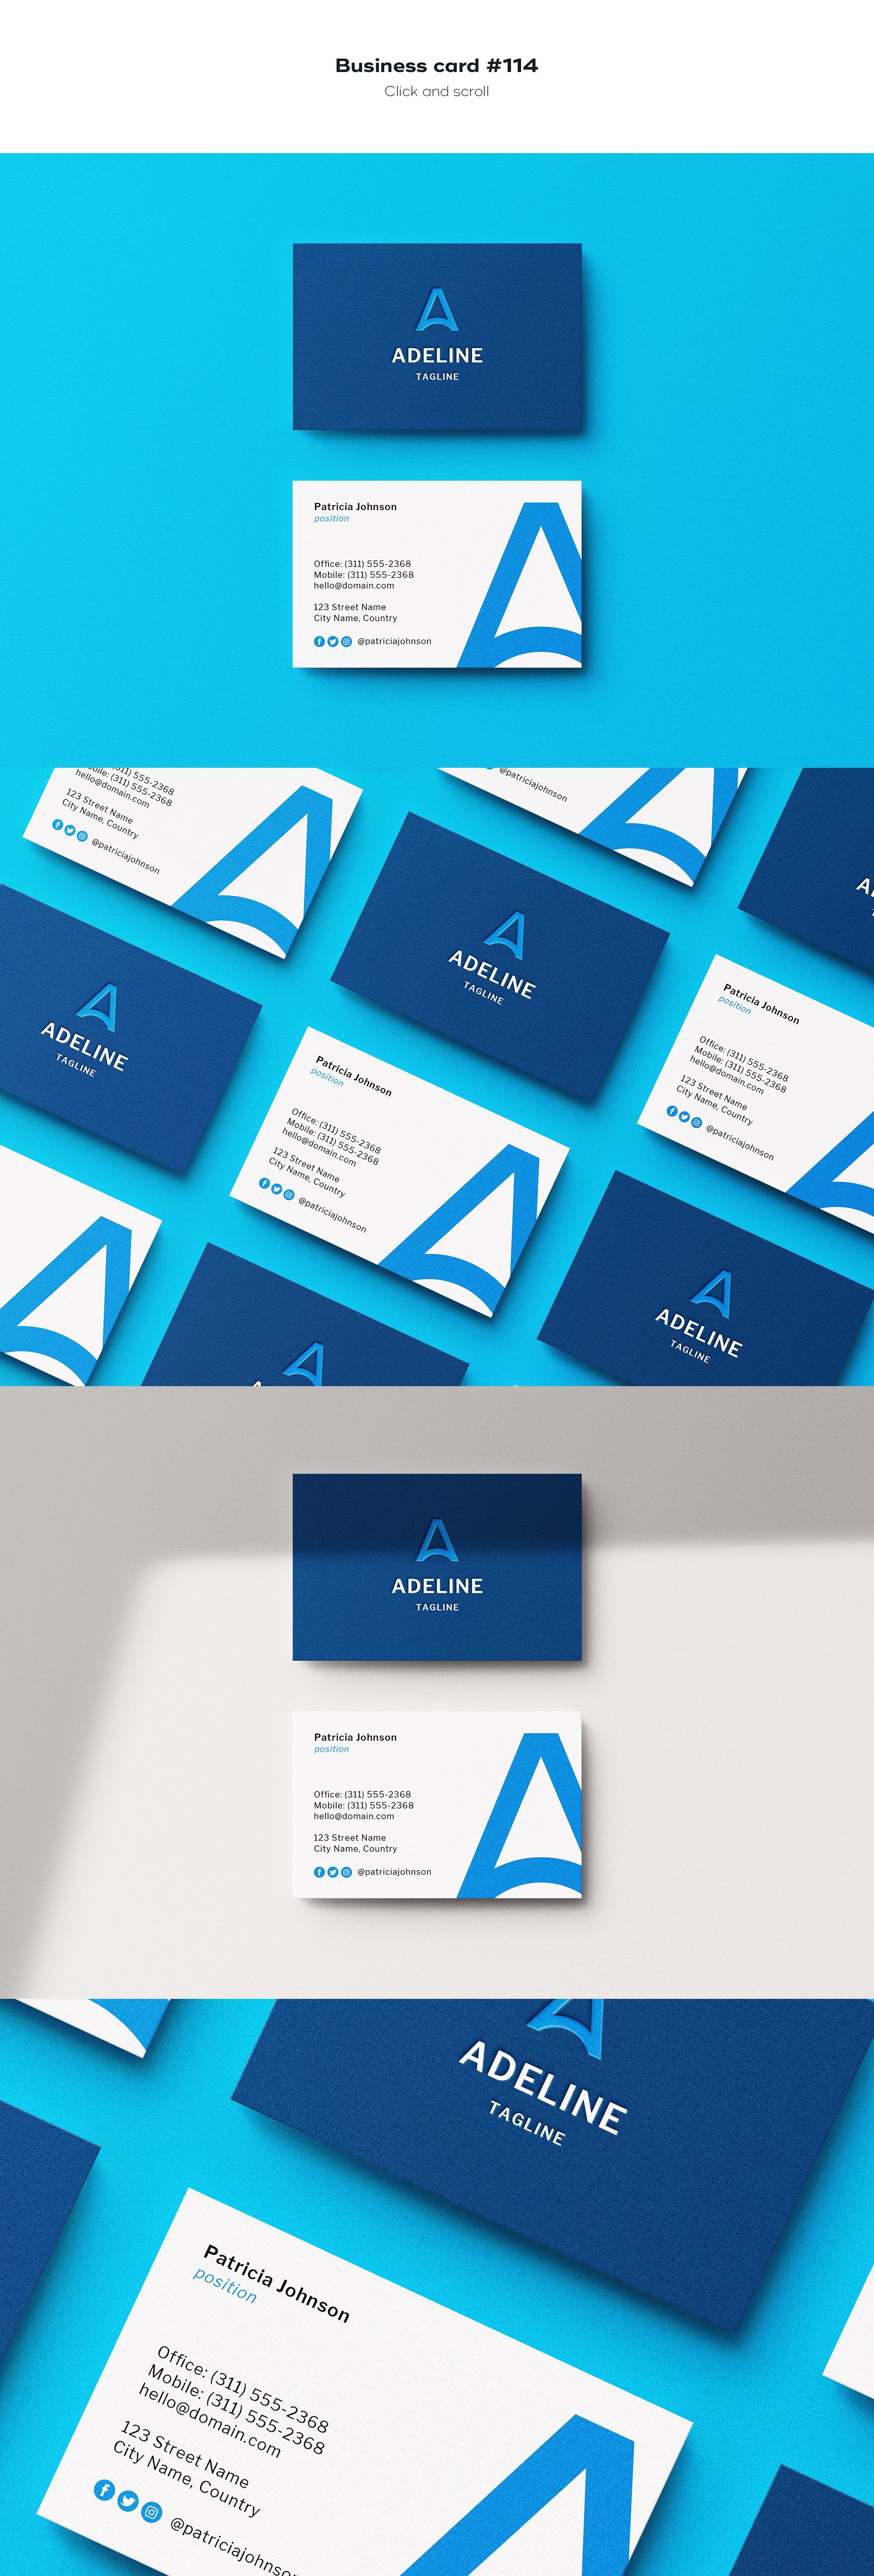 business card 114 994